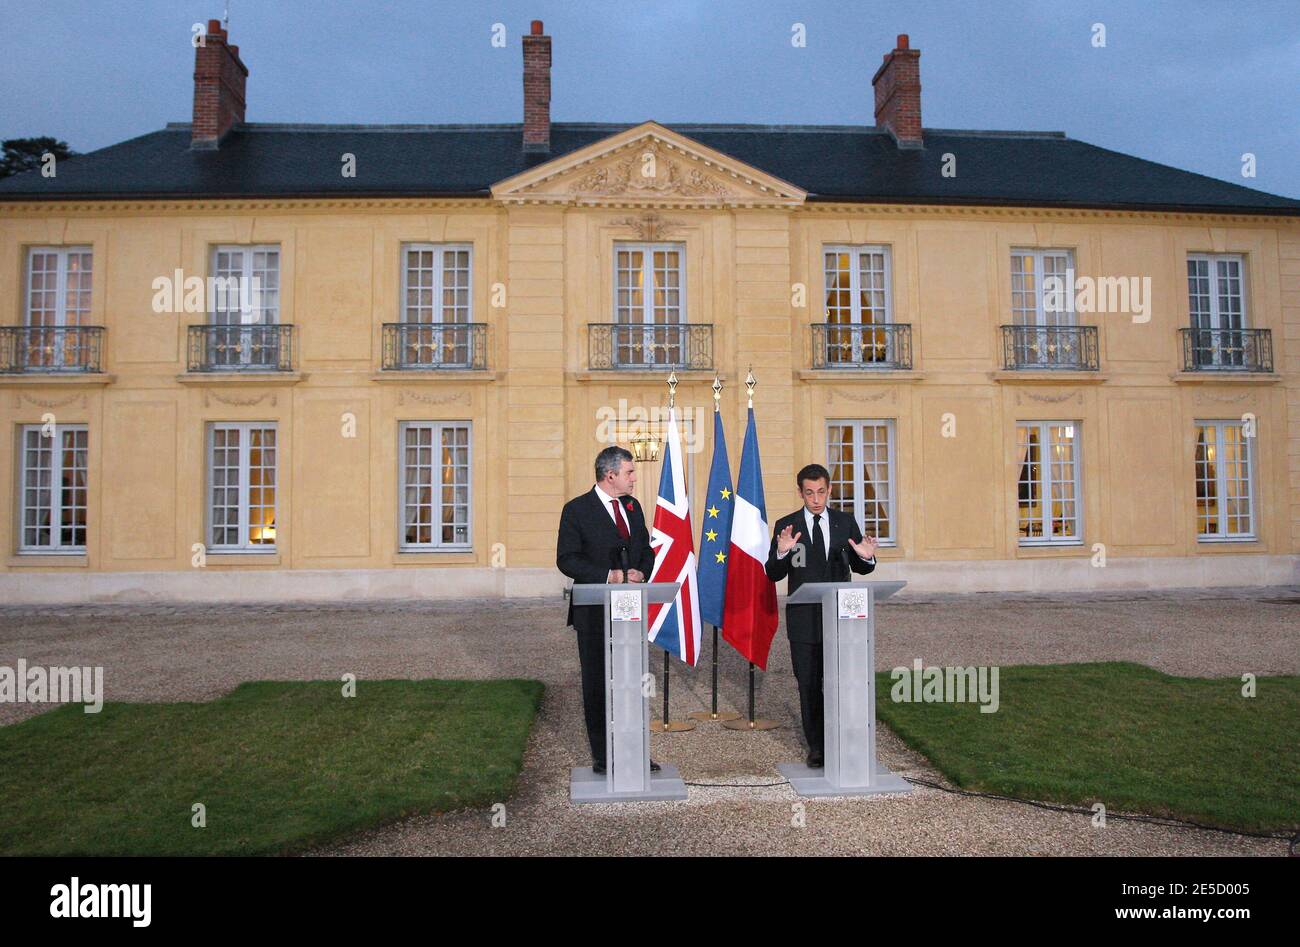 French President Nicolas Sarkozy (R) delivers a speech next to Britain's  Prime Minister Gordon Brown (L) at the presidential residence at La Lanterne,  in an estate associated with the Chateau de Versailles